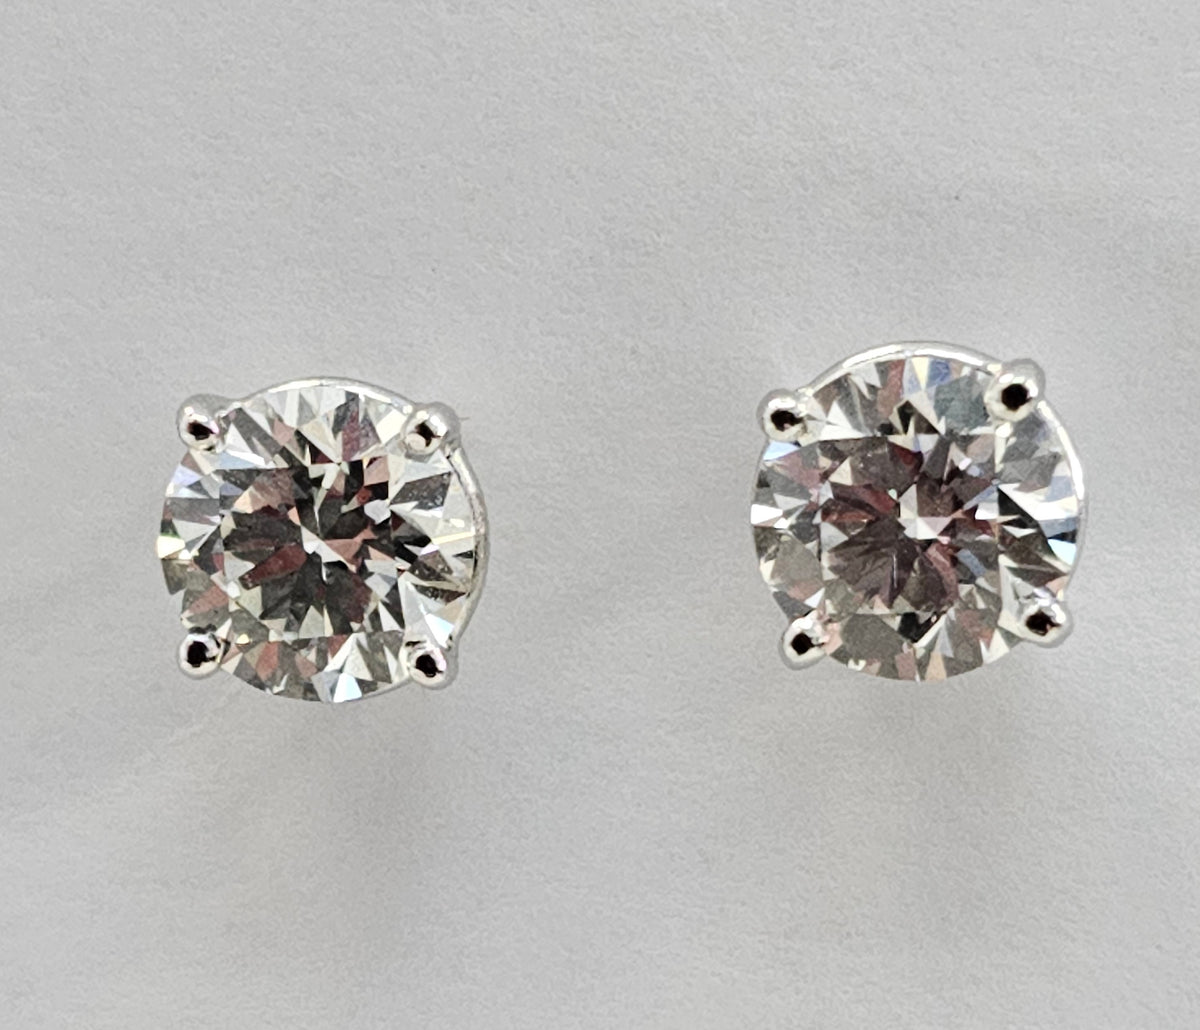 Laboratory Grown Diamond Stud Earrings, 2.10 Total Carat Weight, Set in 14kt White Gold